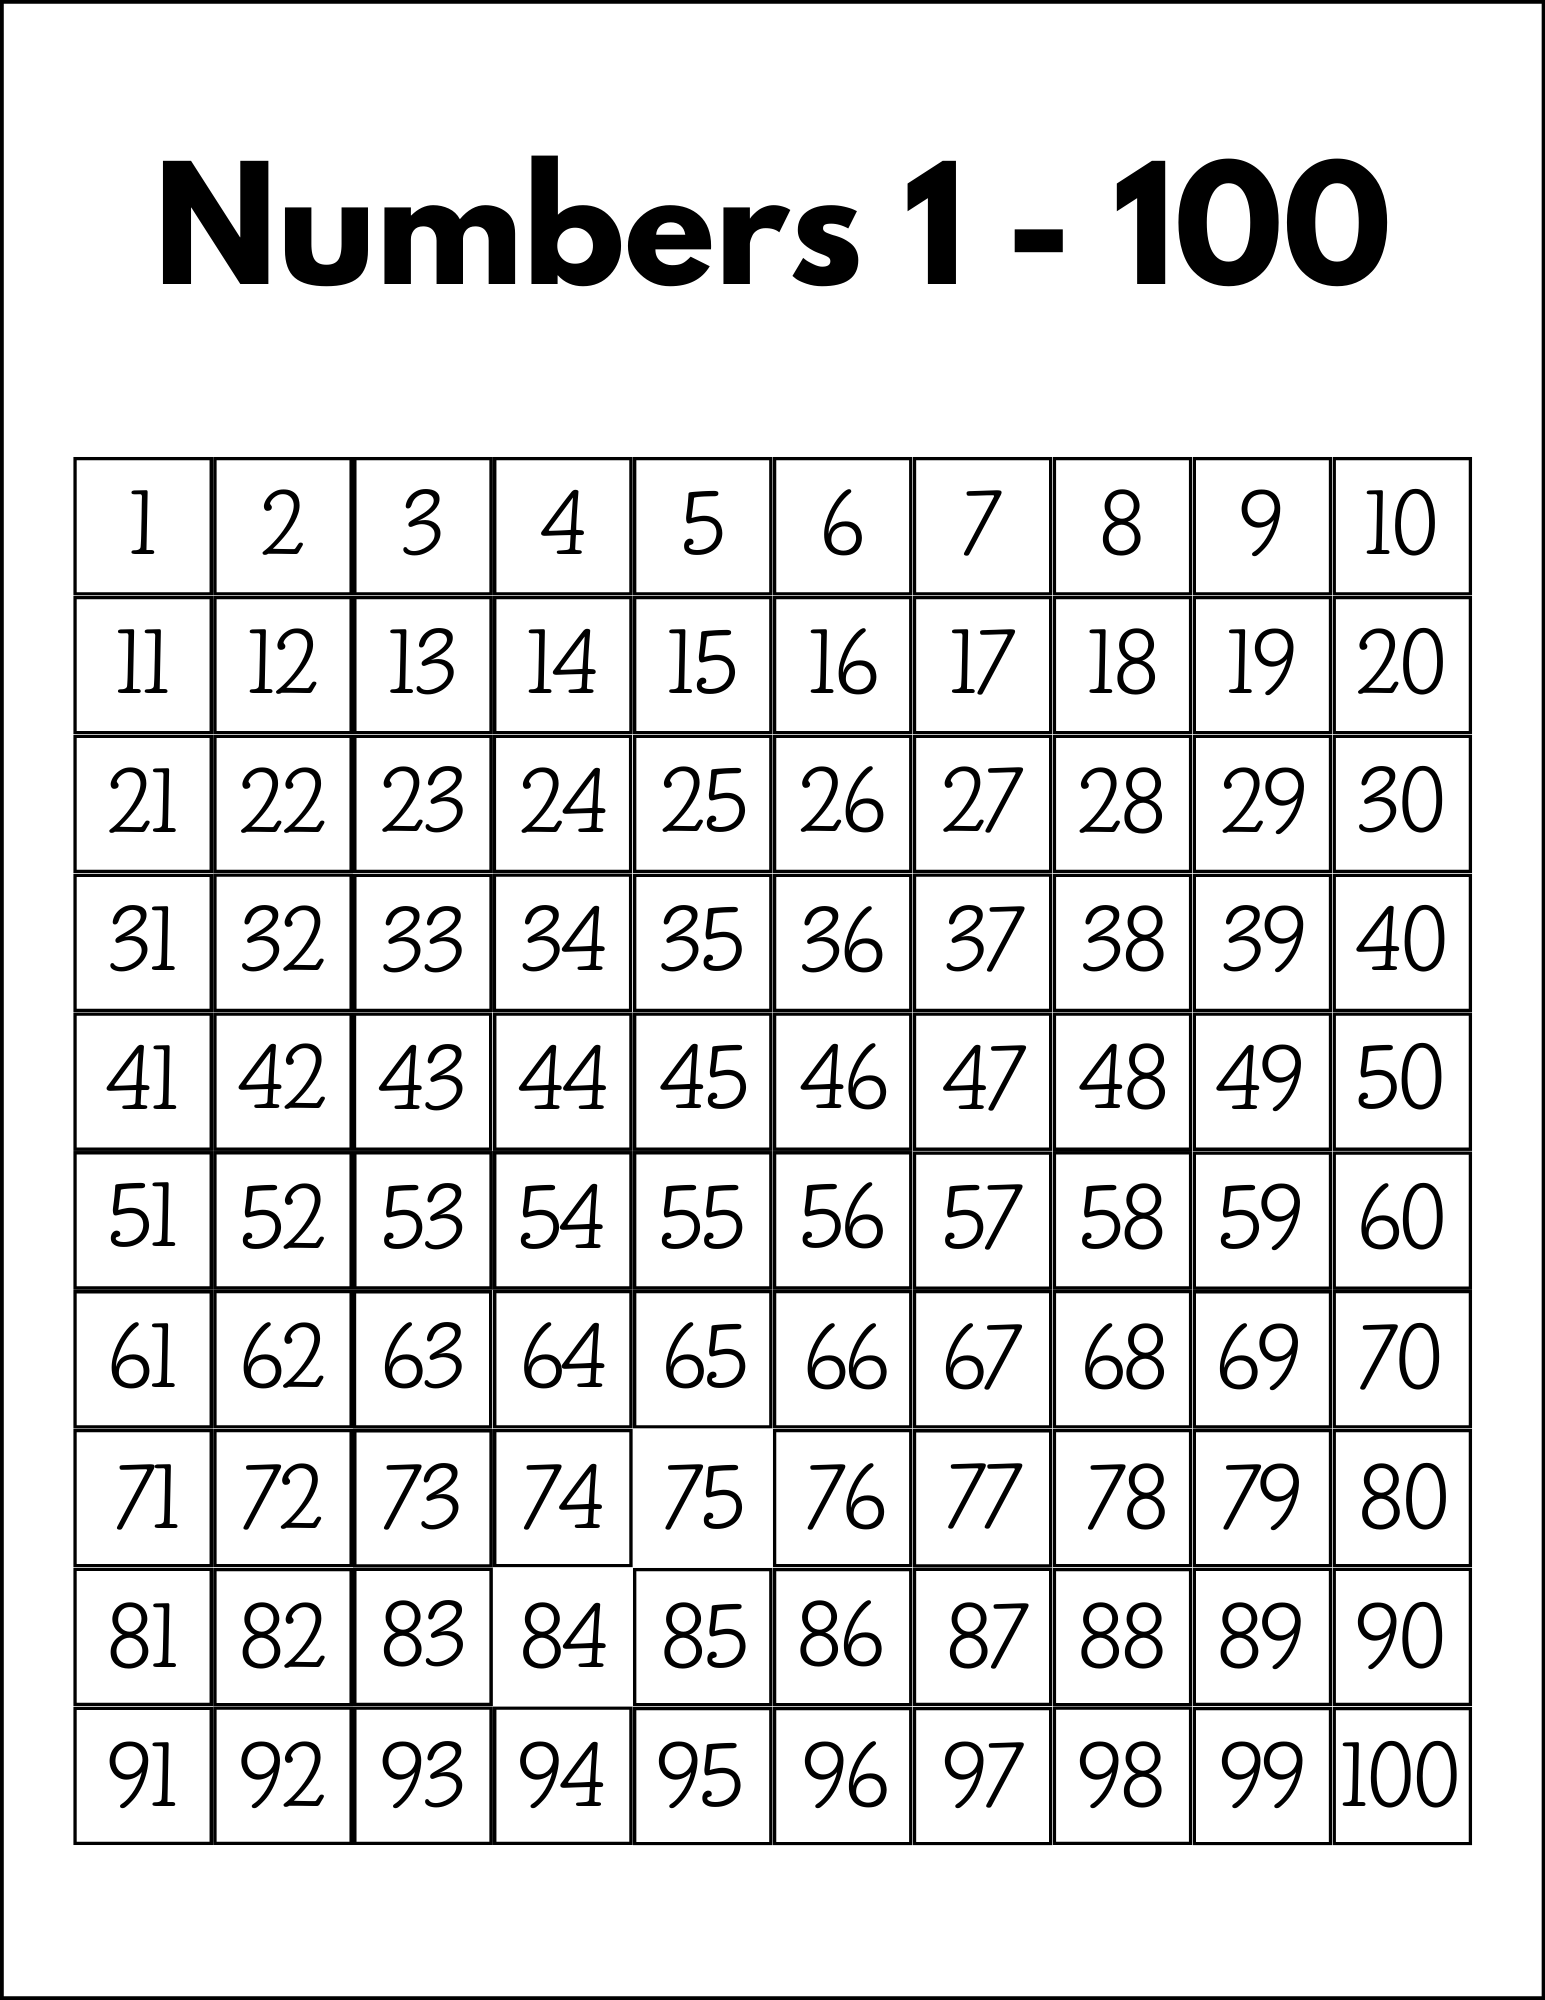 hundreds-charts-numbers-1-to-100-free-printable-pdf-files